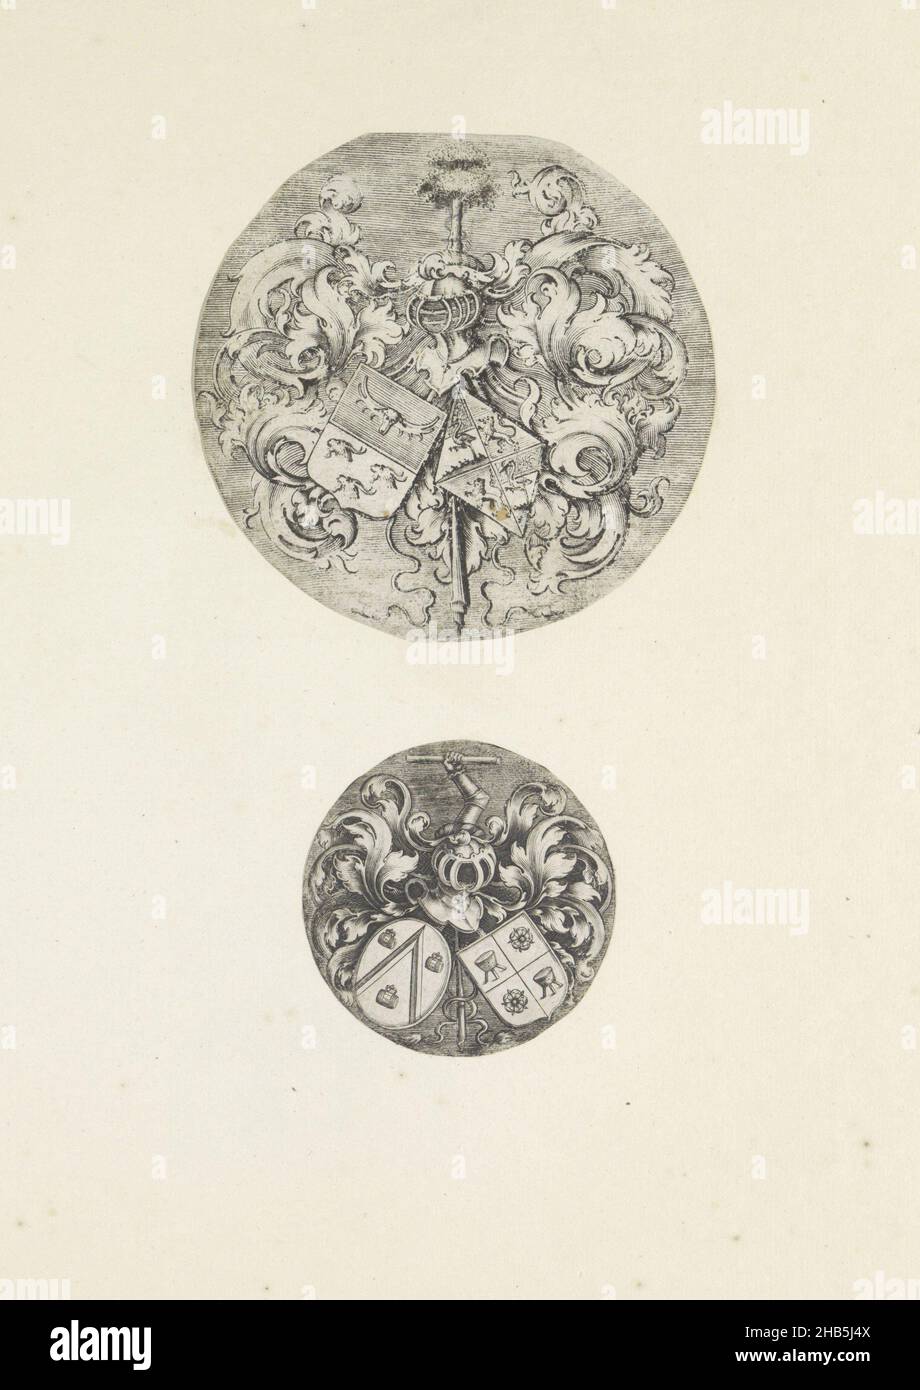 Two arms, Two representations on an album leaf. These are two showy helmets with arms. Above a double shield with three goat heads and antlers on the left and a weapon with two lions and two storks on the right (possibly De Vogelaer family). At the bottom a double shield. The shield on the left is related to the Verlaen or Van der Laen family (twill with three barrels). To the right a quadrilateral shield with two stools and two roses. The prints are part of an album., print maker: anonymous, 1550 - 1650, paper, engraving, height 383 mm × width 310 mm Stock Photo